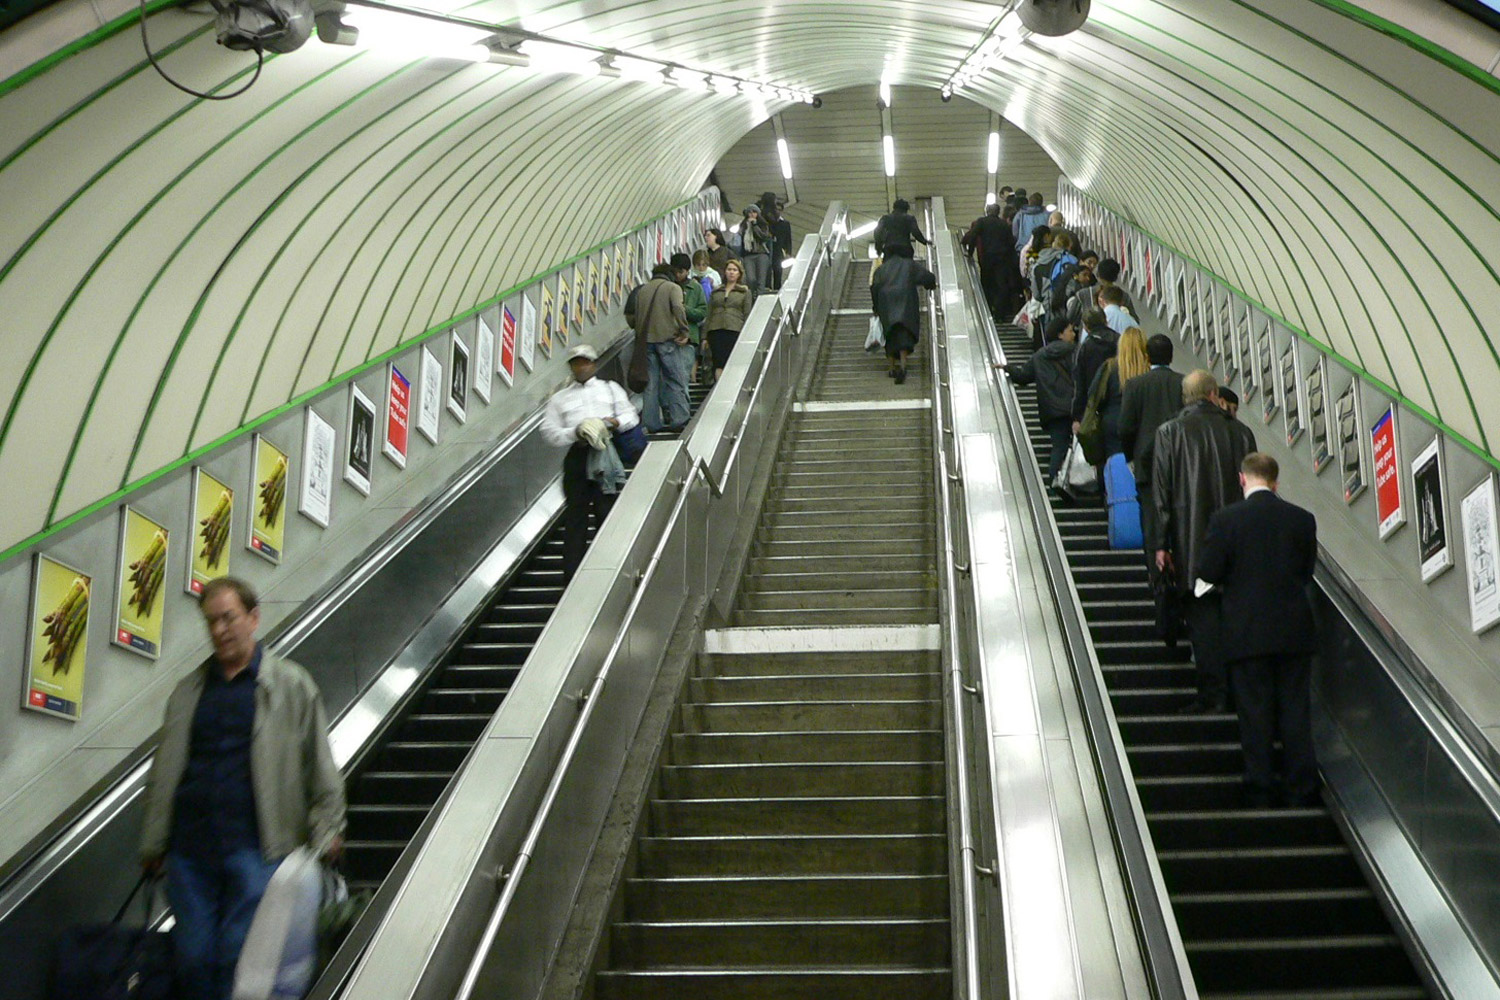 Lift and escalator jobs in london